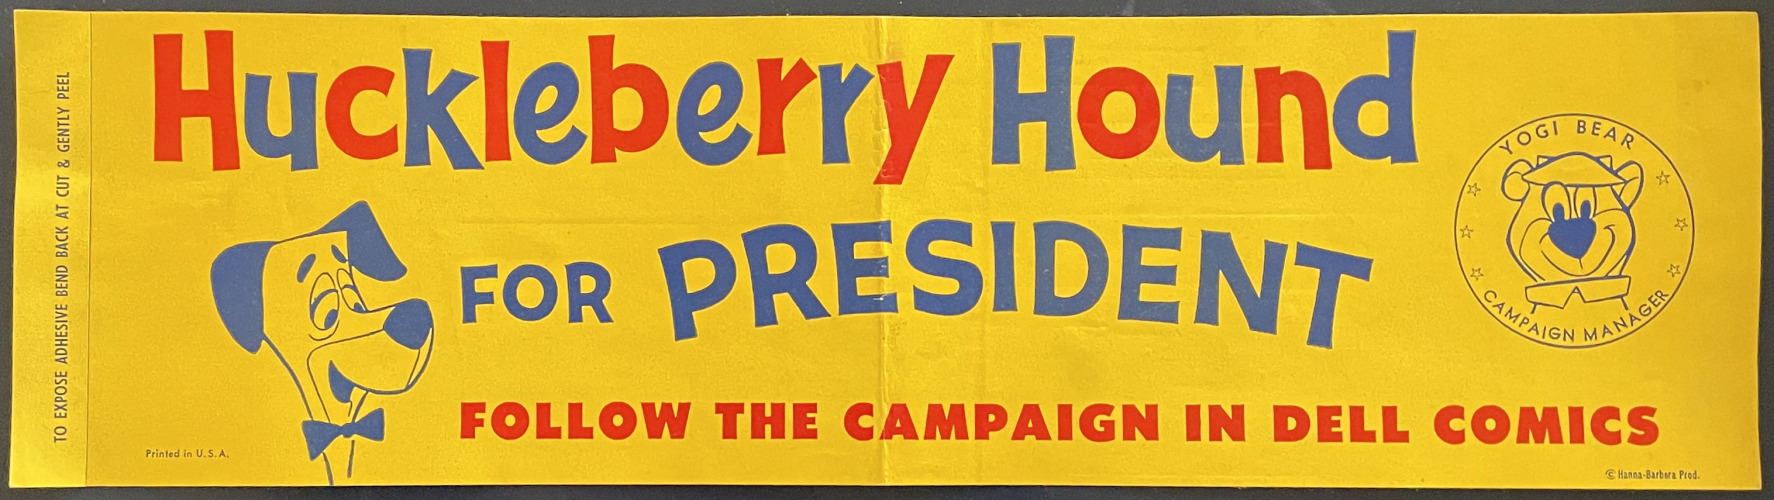 Huckleberry Hound for President
[Bumper sticker, Dell Comics 1960]
When The Huckleberry Hound Show debuted –in syndication, on local television stations- in 1958 I was 7 years old. And you would’ve thought it was two years earlier or six years later,...